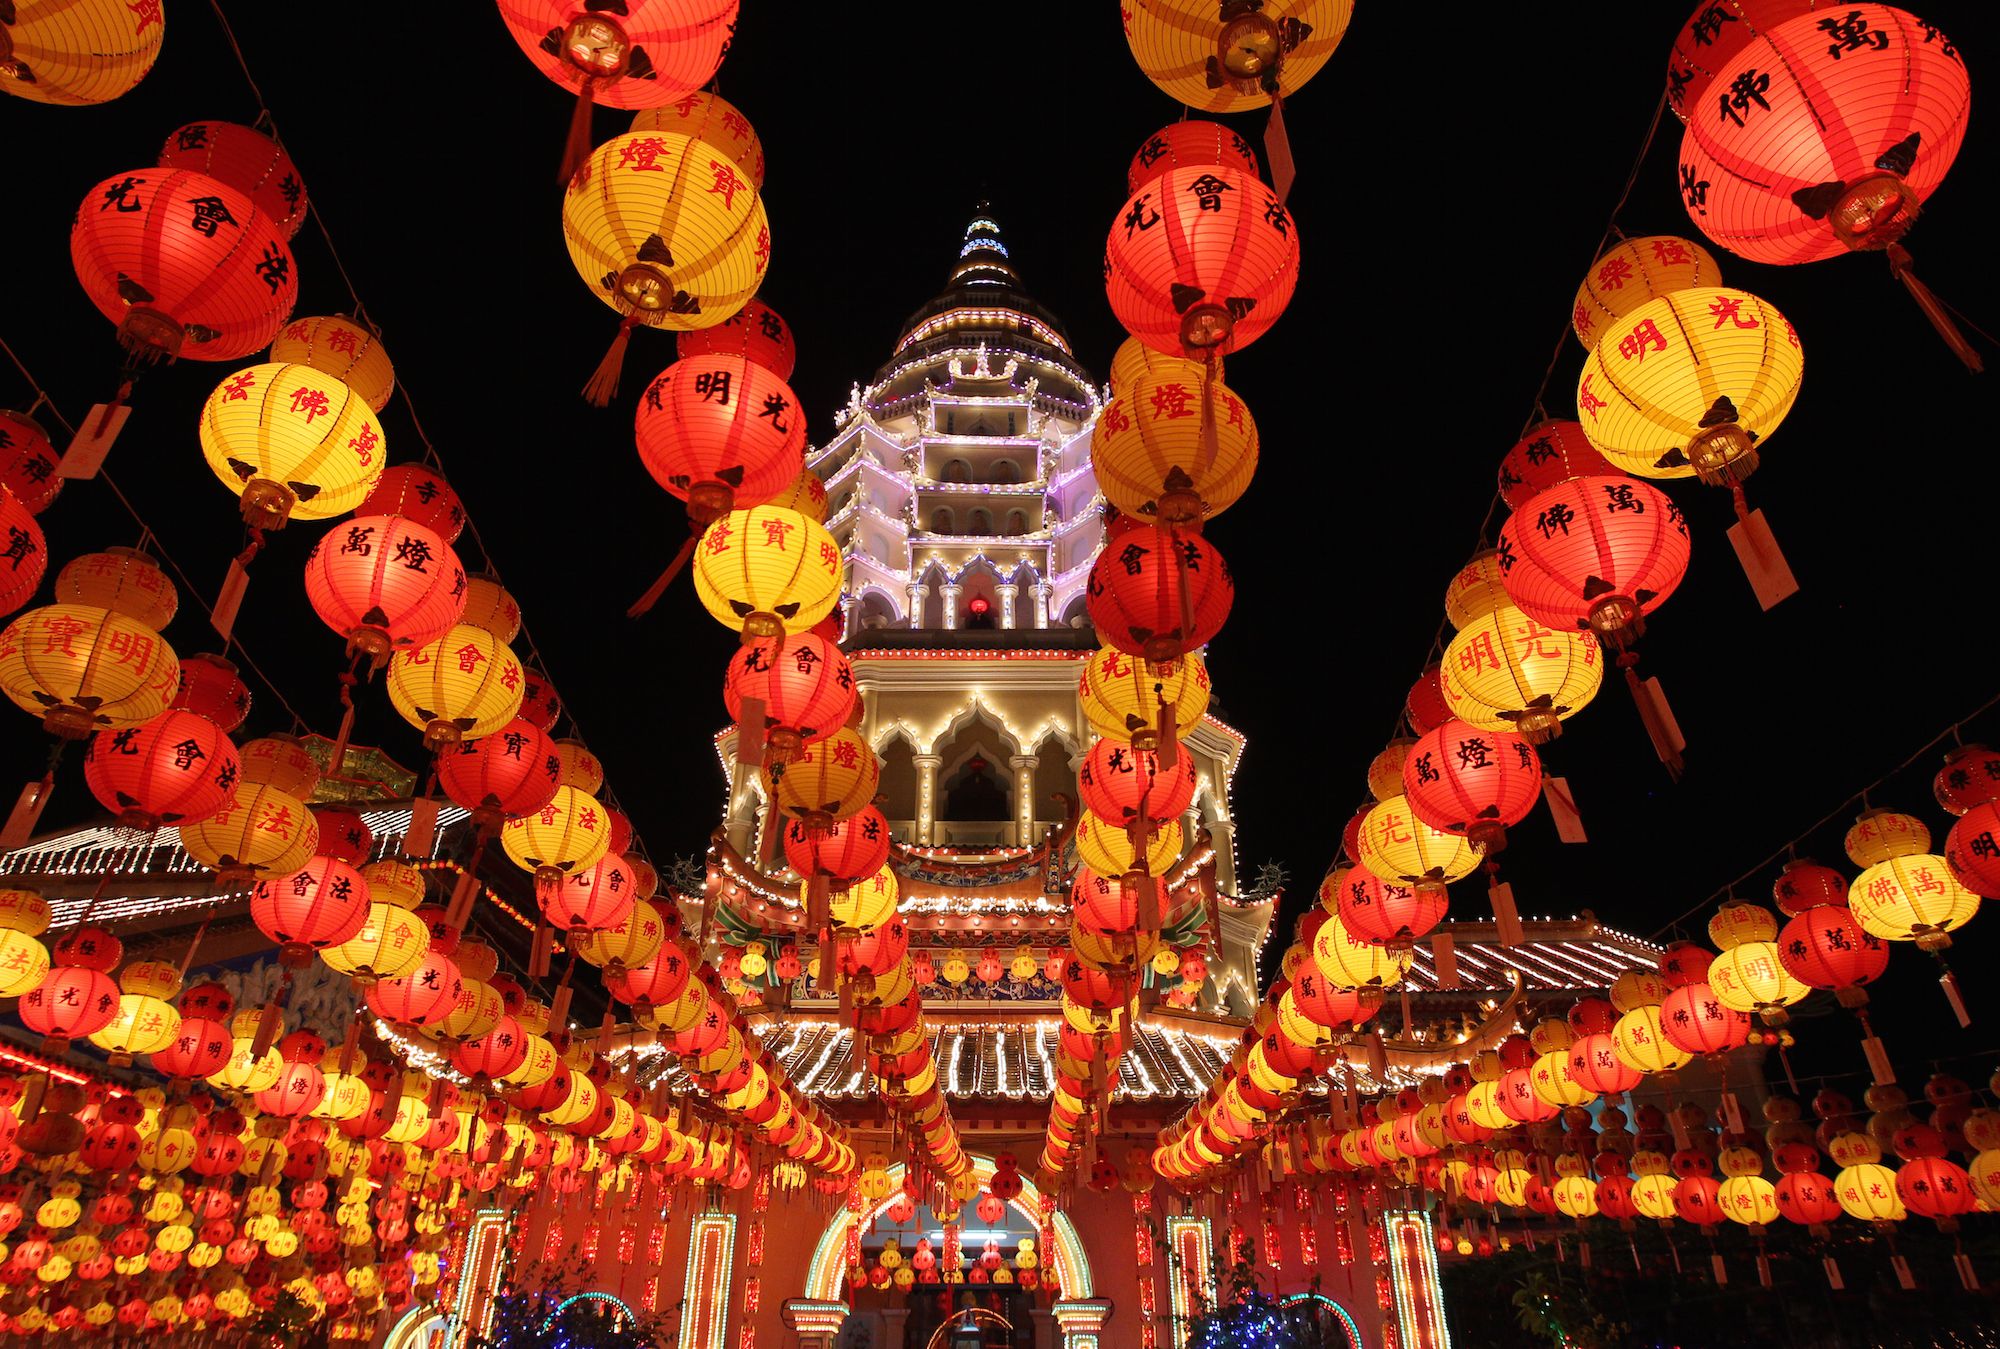 Using light and decoration to celebrate Lunar and Chinese New Year